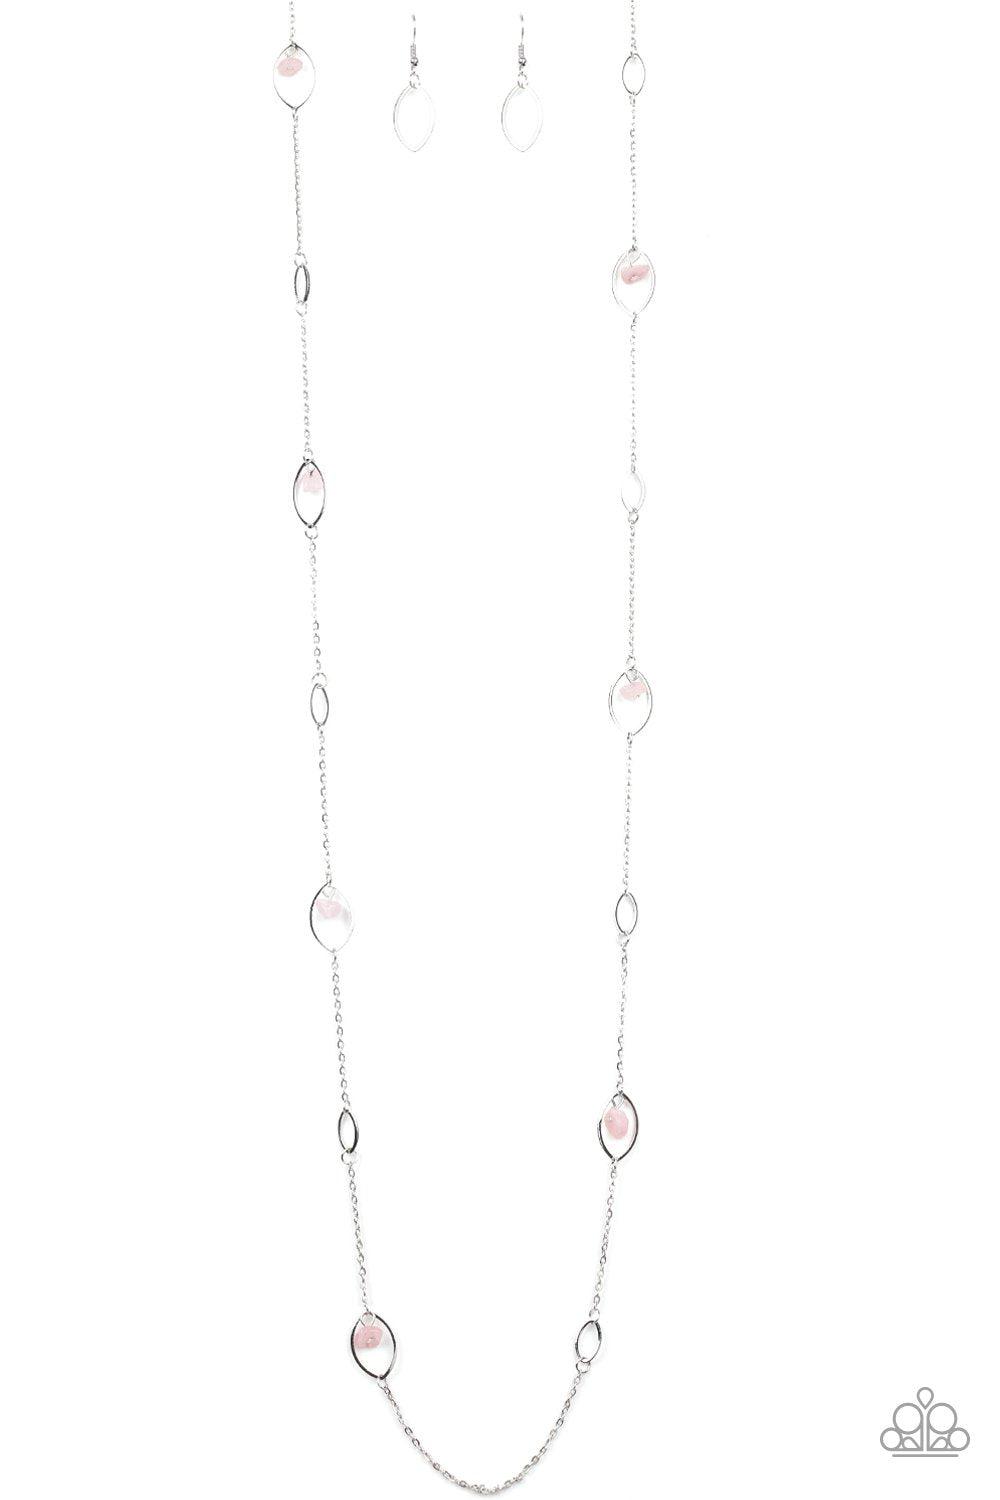 Rocky Razzle Pink and Silver Necklace - Paparazzi Accessories-CarasShop.com - $5 Jewelry by Cara Jewels